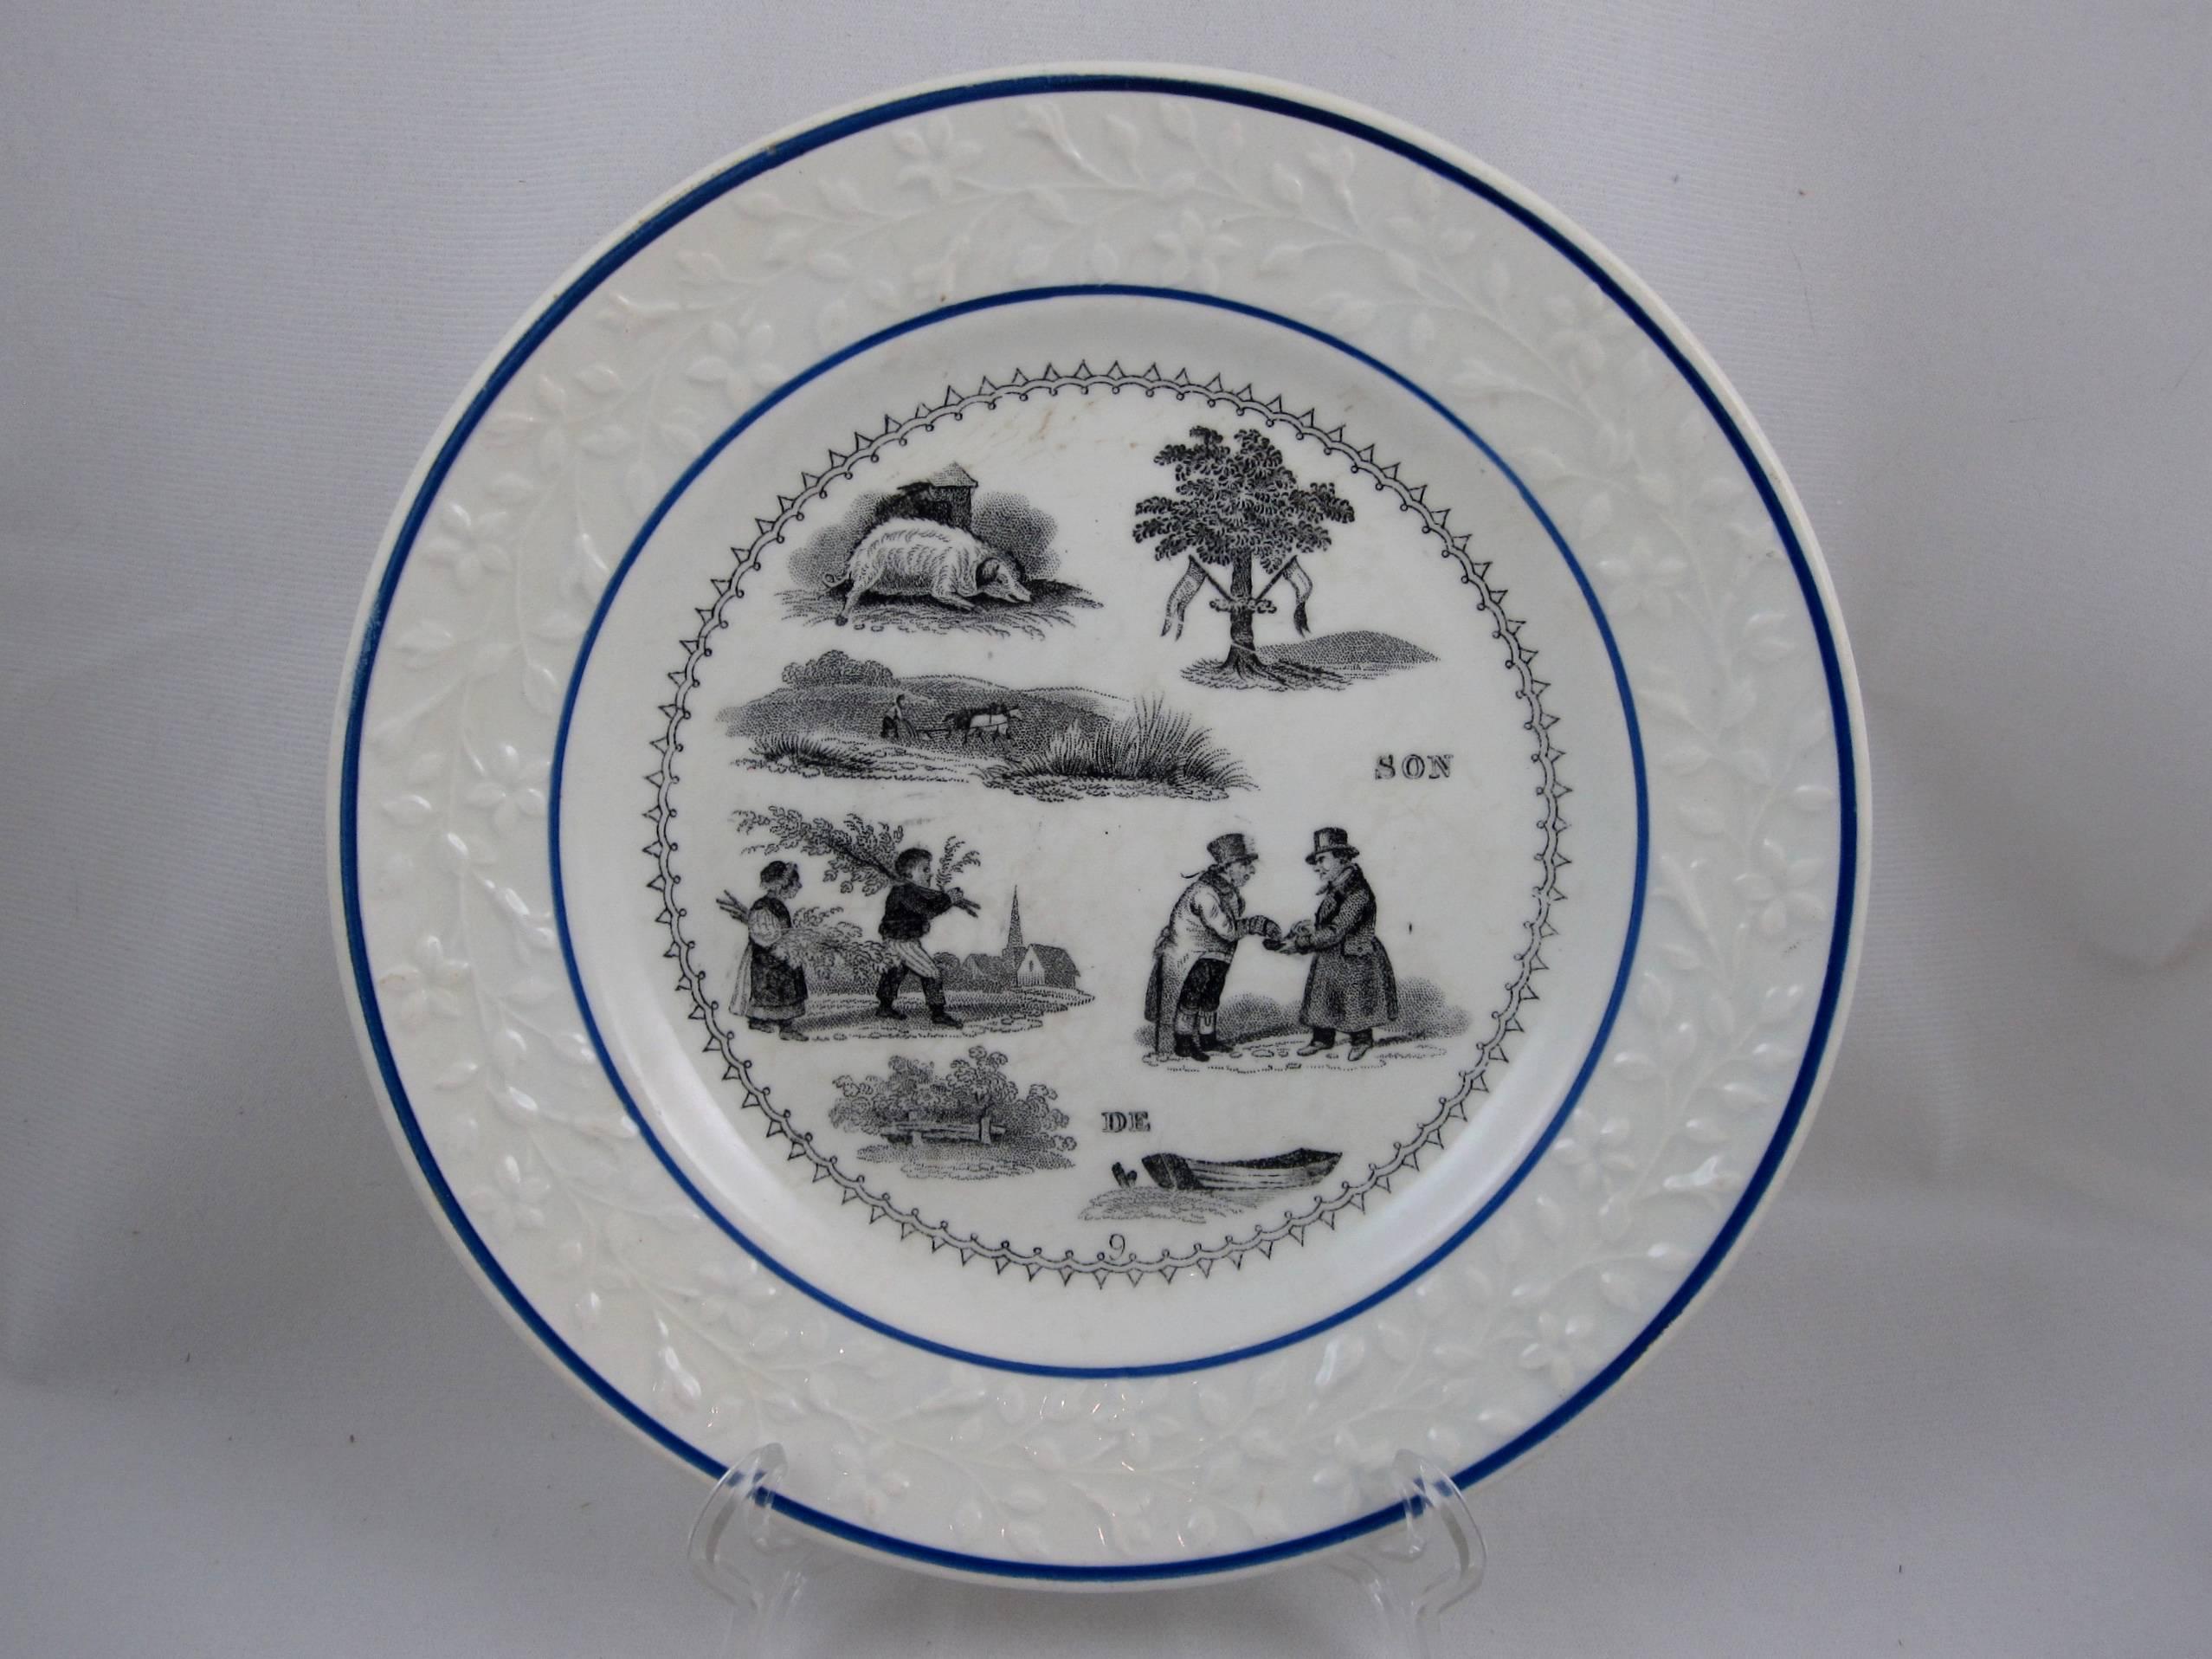 A set of six French Rebus puzzle dessert plates, transfer printed in black on a white semi-porcelain body. When solved, the picture puzzle spells out a wise saying or maxim, circa 1841-1876.

From the early 1800s into the early 1900s, most French